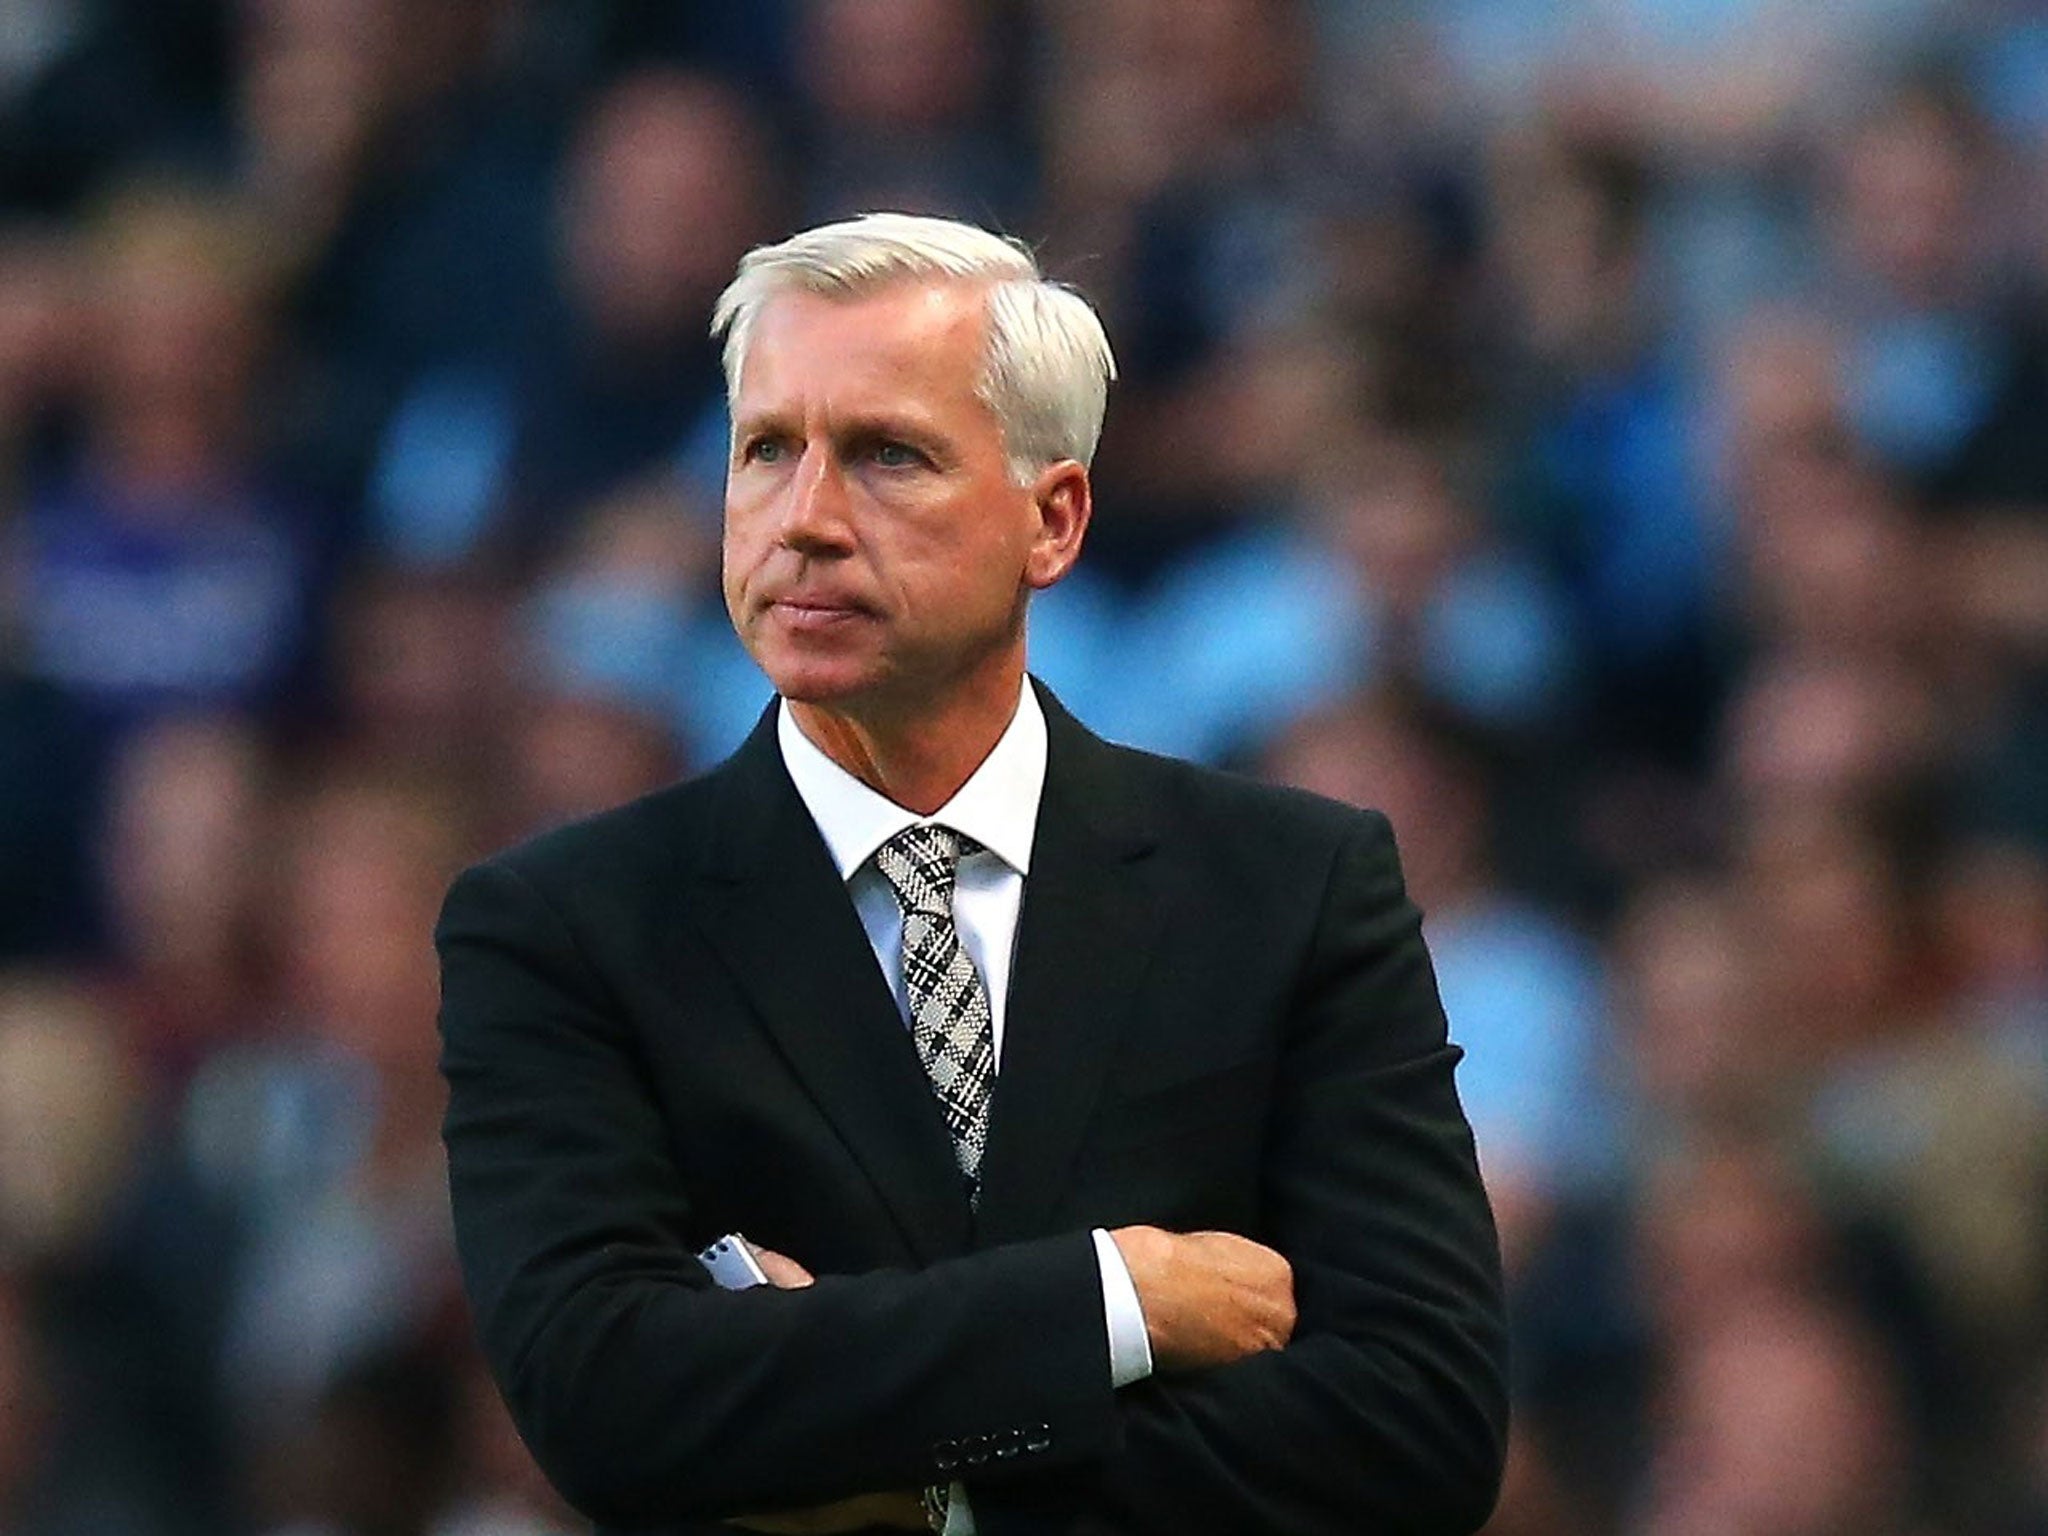 Alan Pardew has accused Arsenal of lacking 'respect and honour' in lodging a £10m bid for Yohan Cabaye